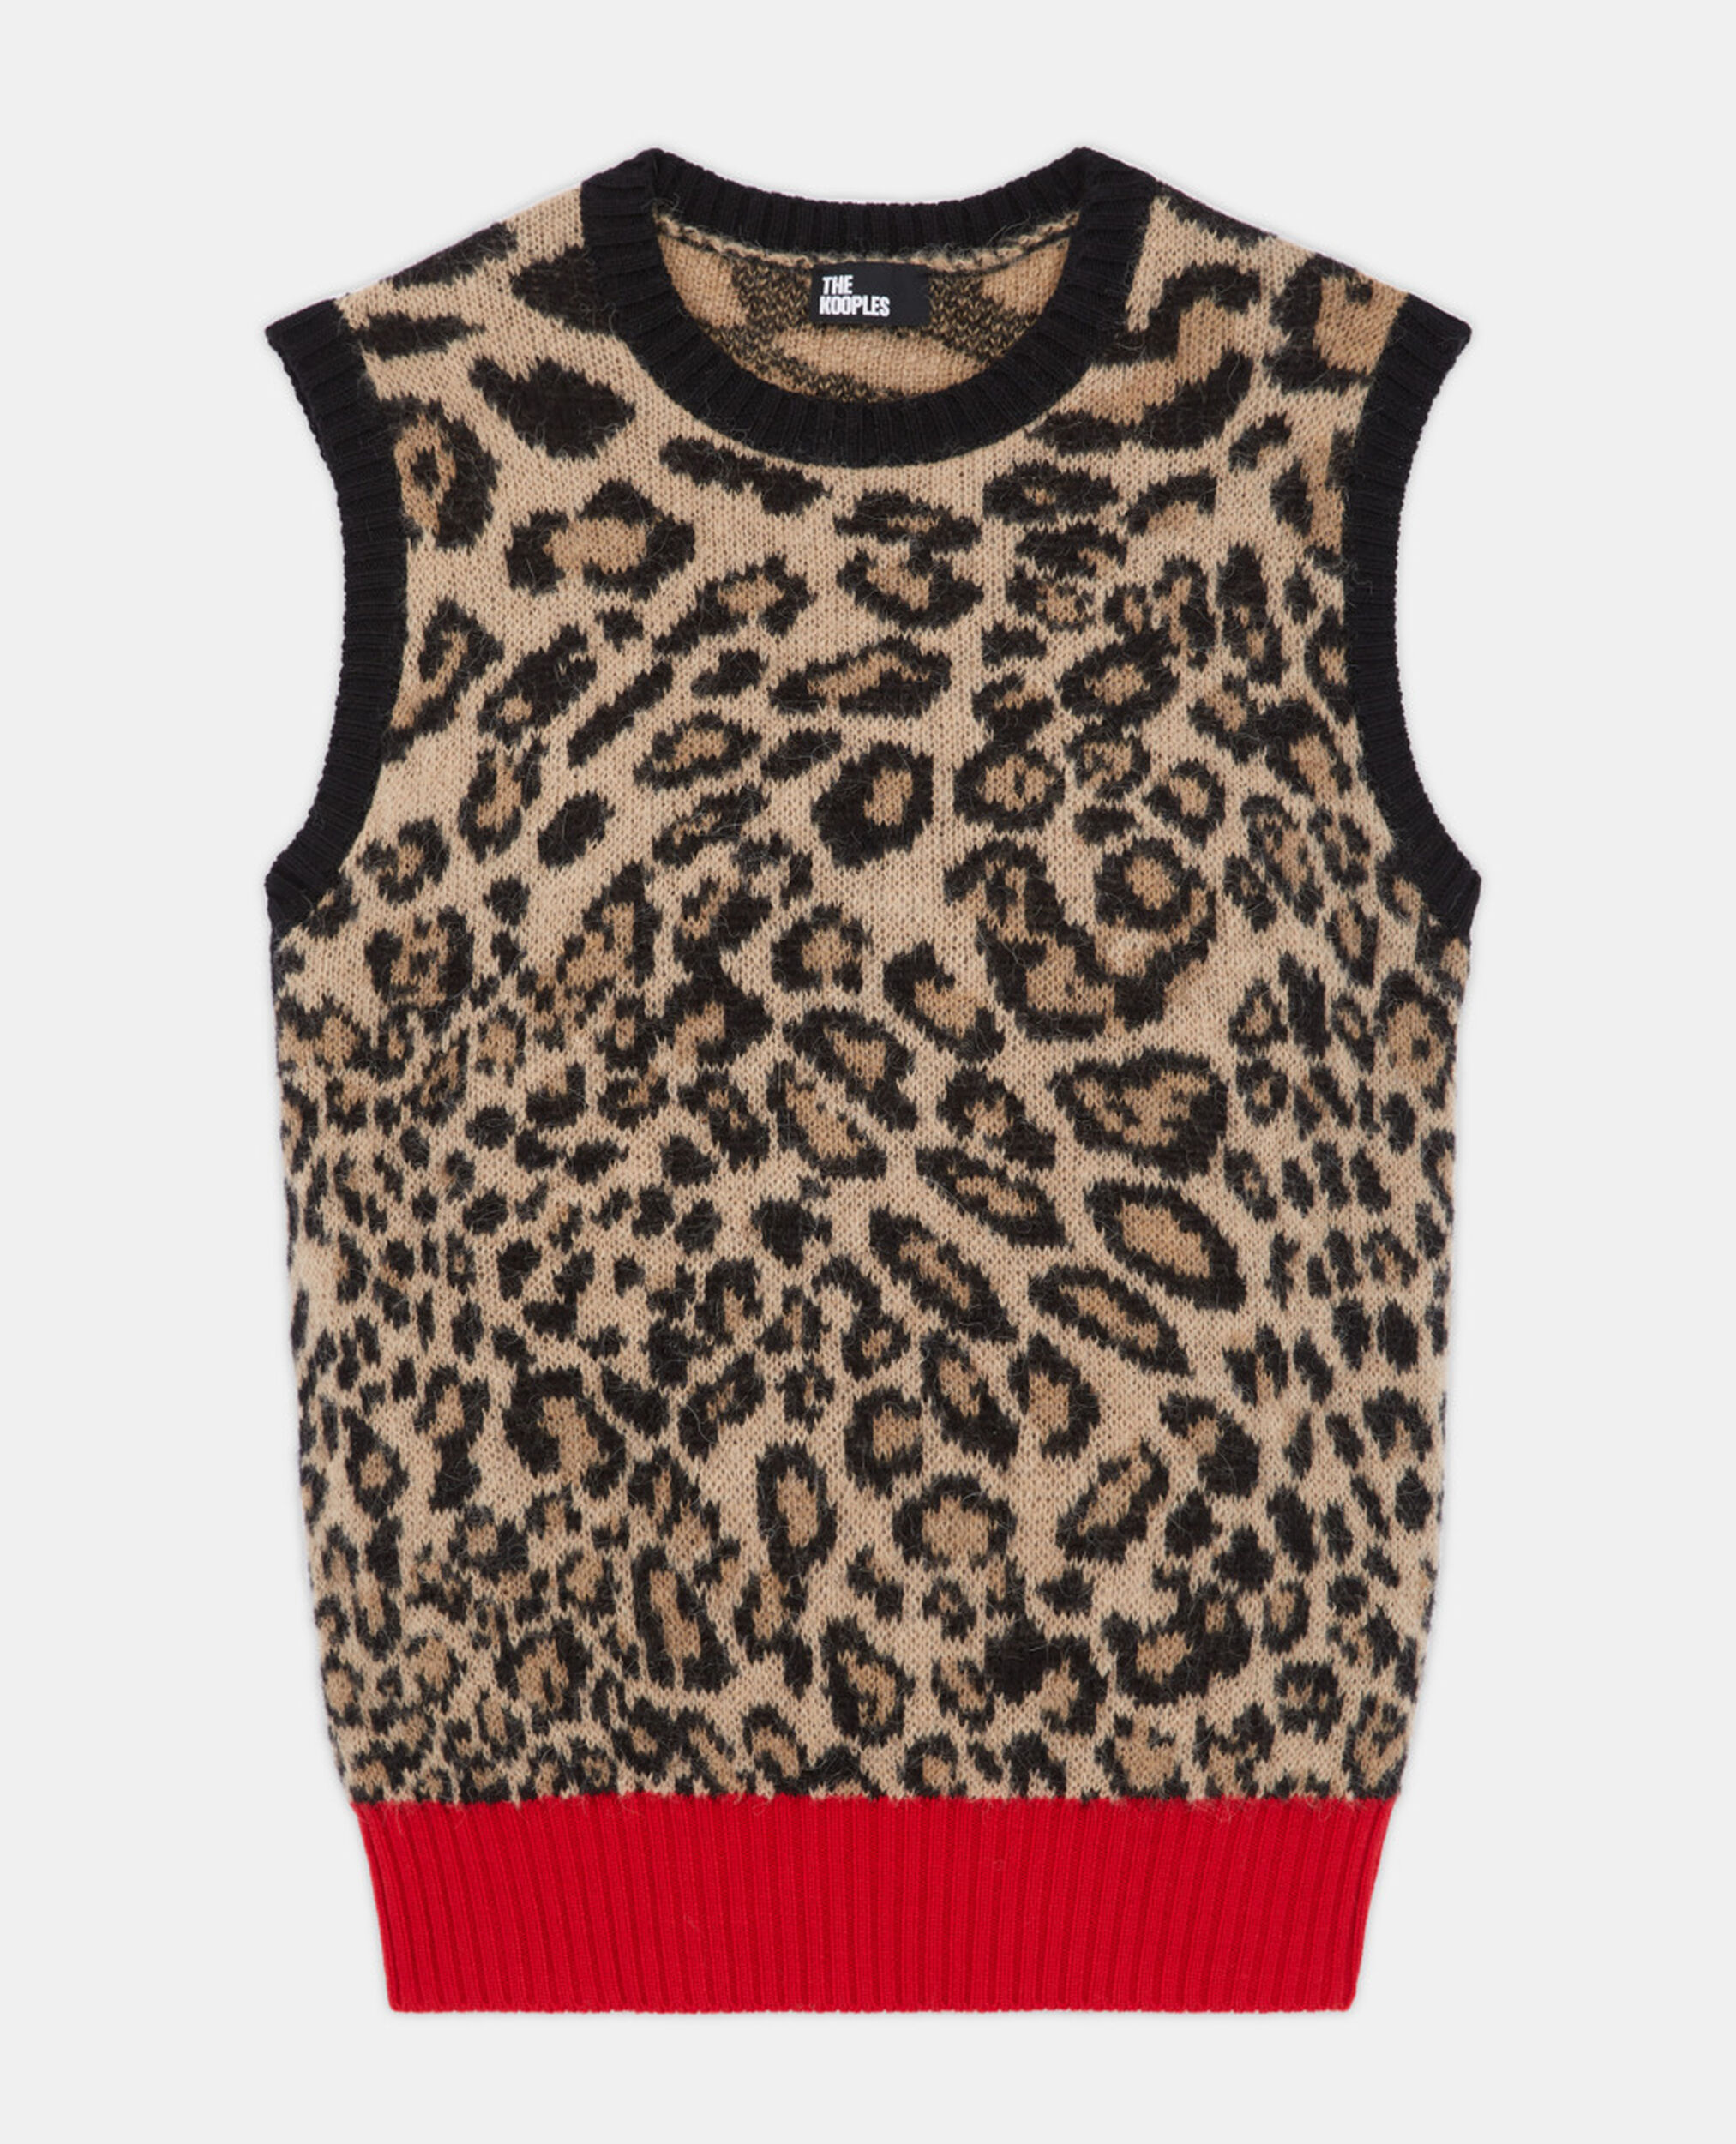 Pull sans manches léopard, LEOPARD, hi-res image number null